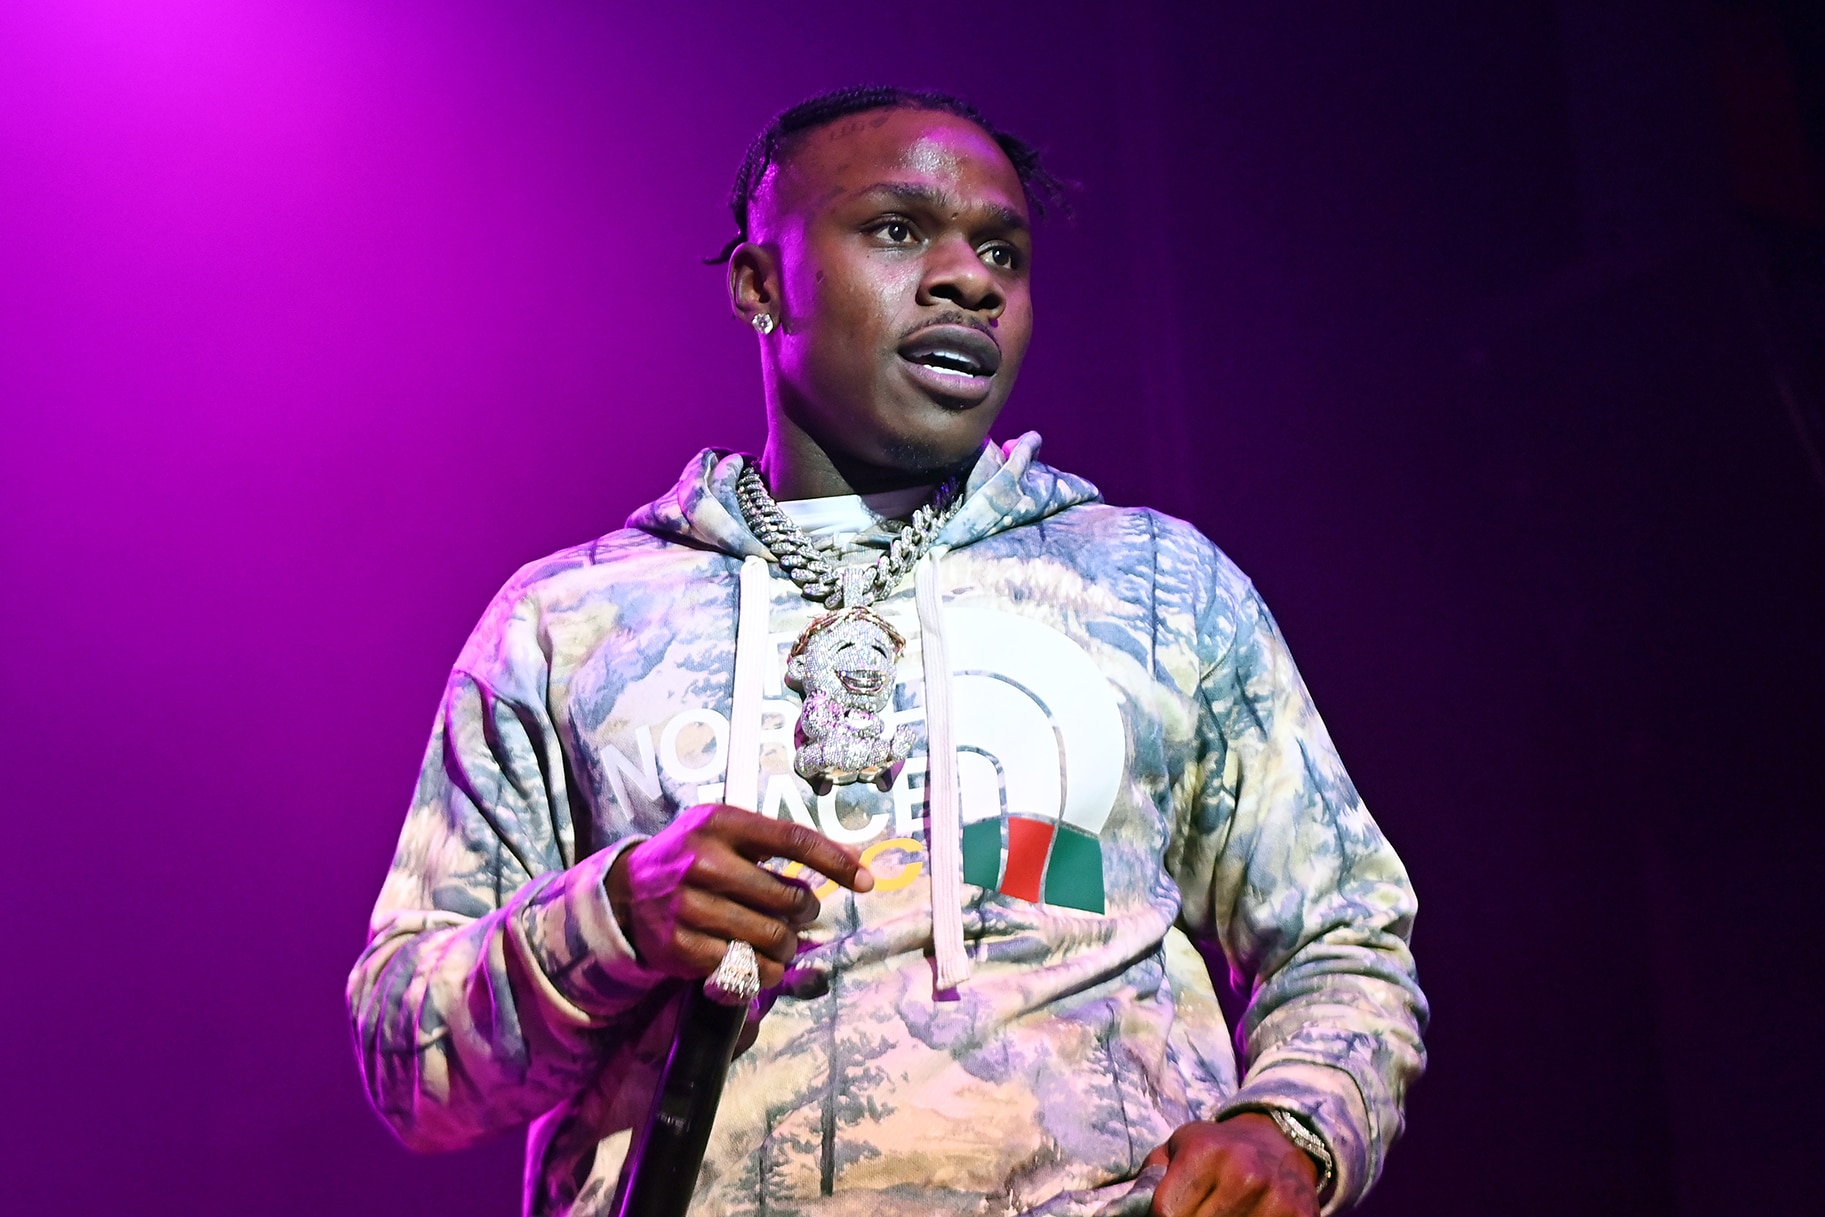 Rapper DaBaby performs onstage.